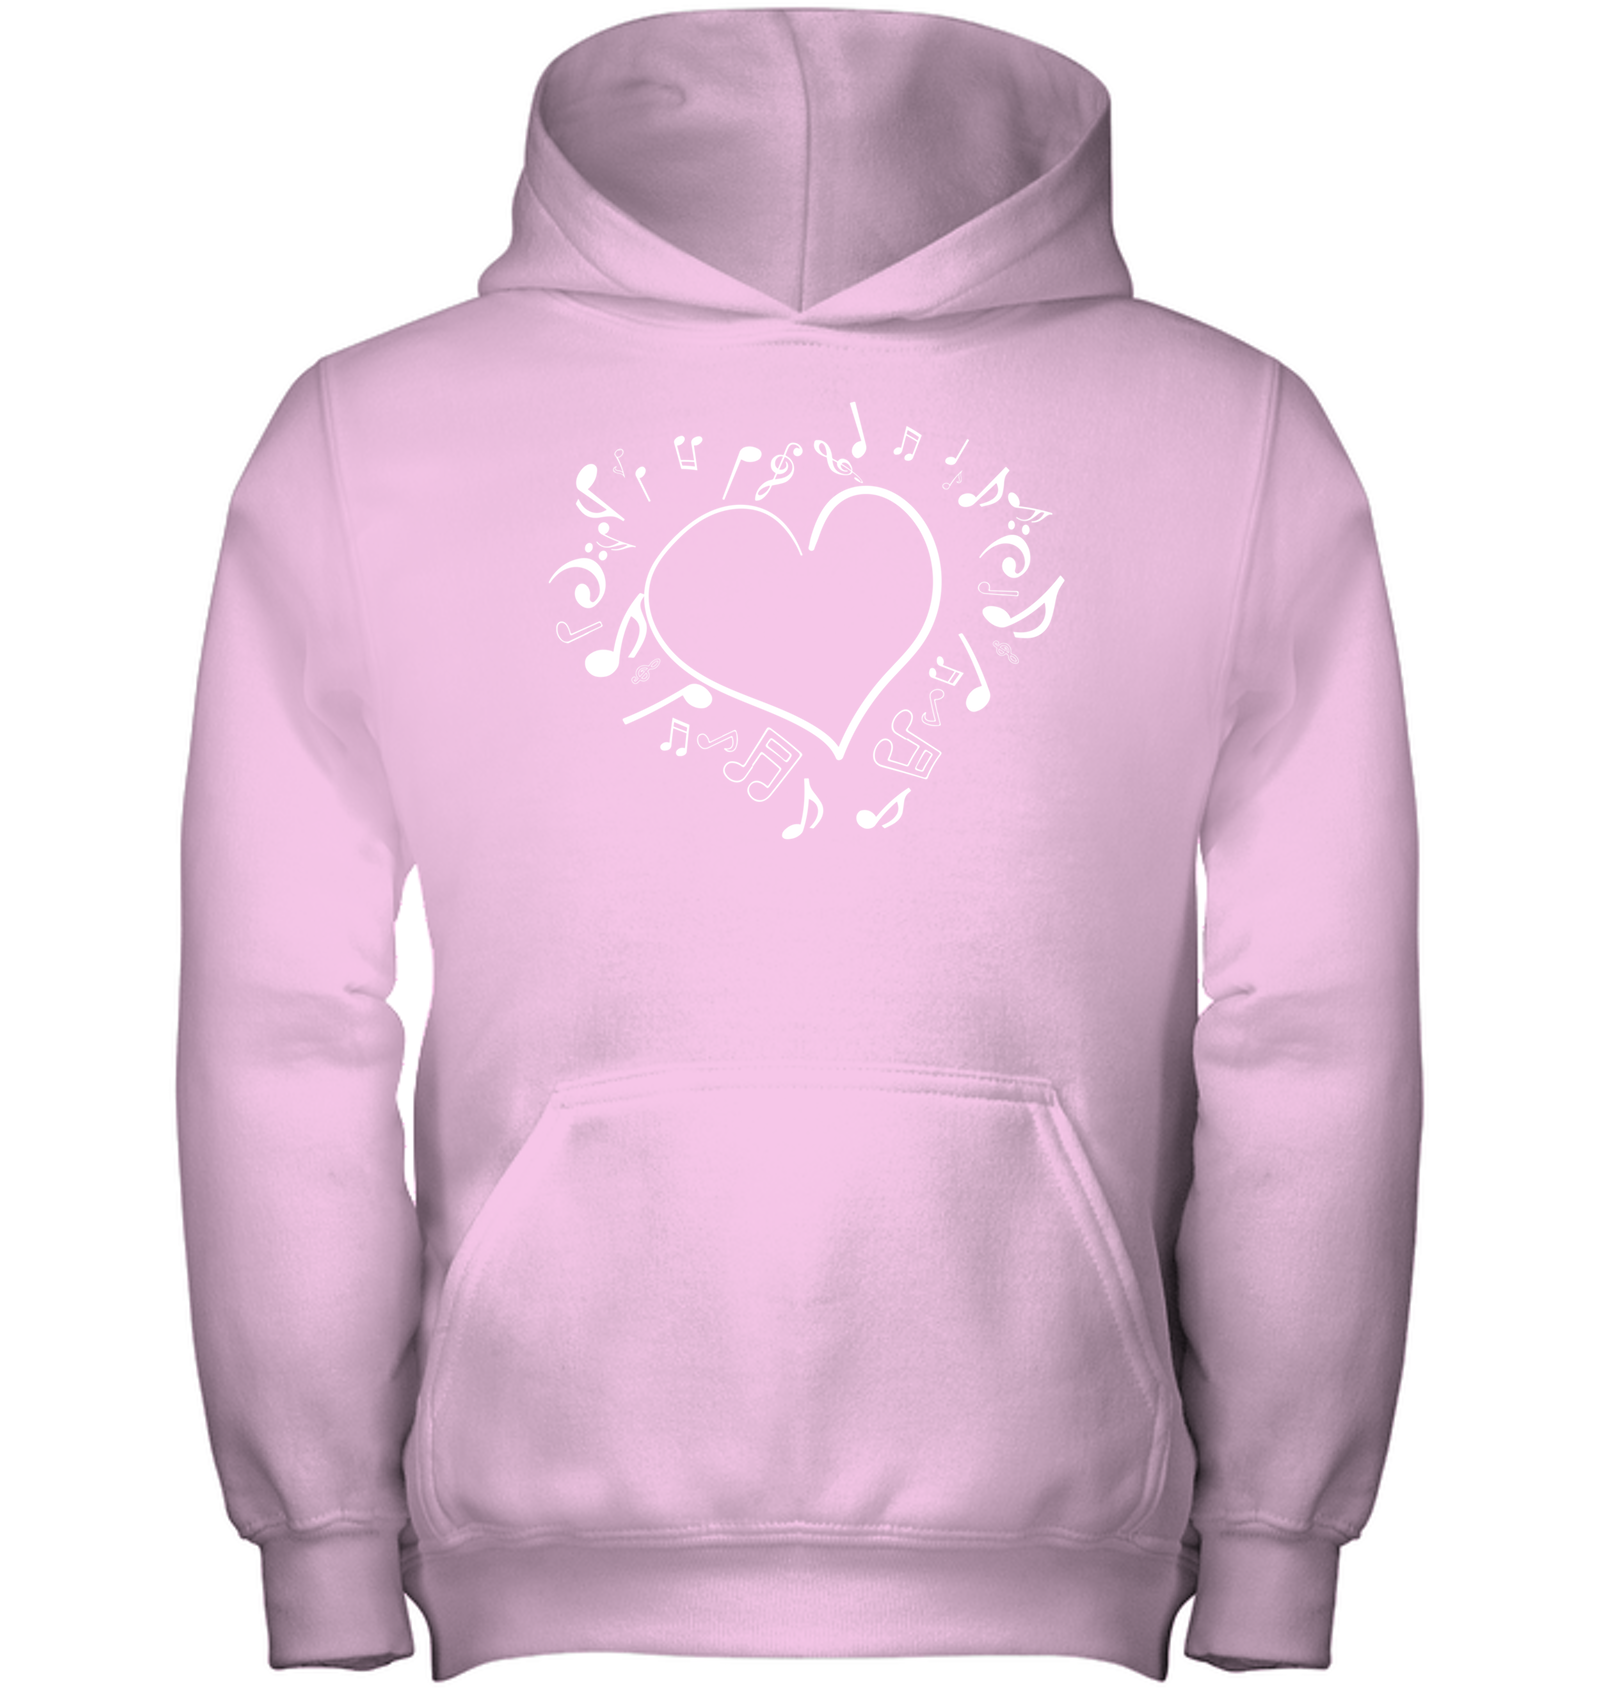 Floating Notes Heart White - Gildan Youth Heavyweight Pullover Hoodie